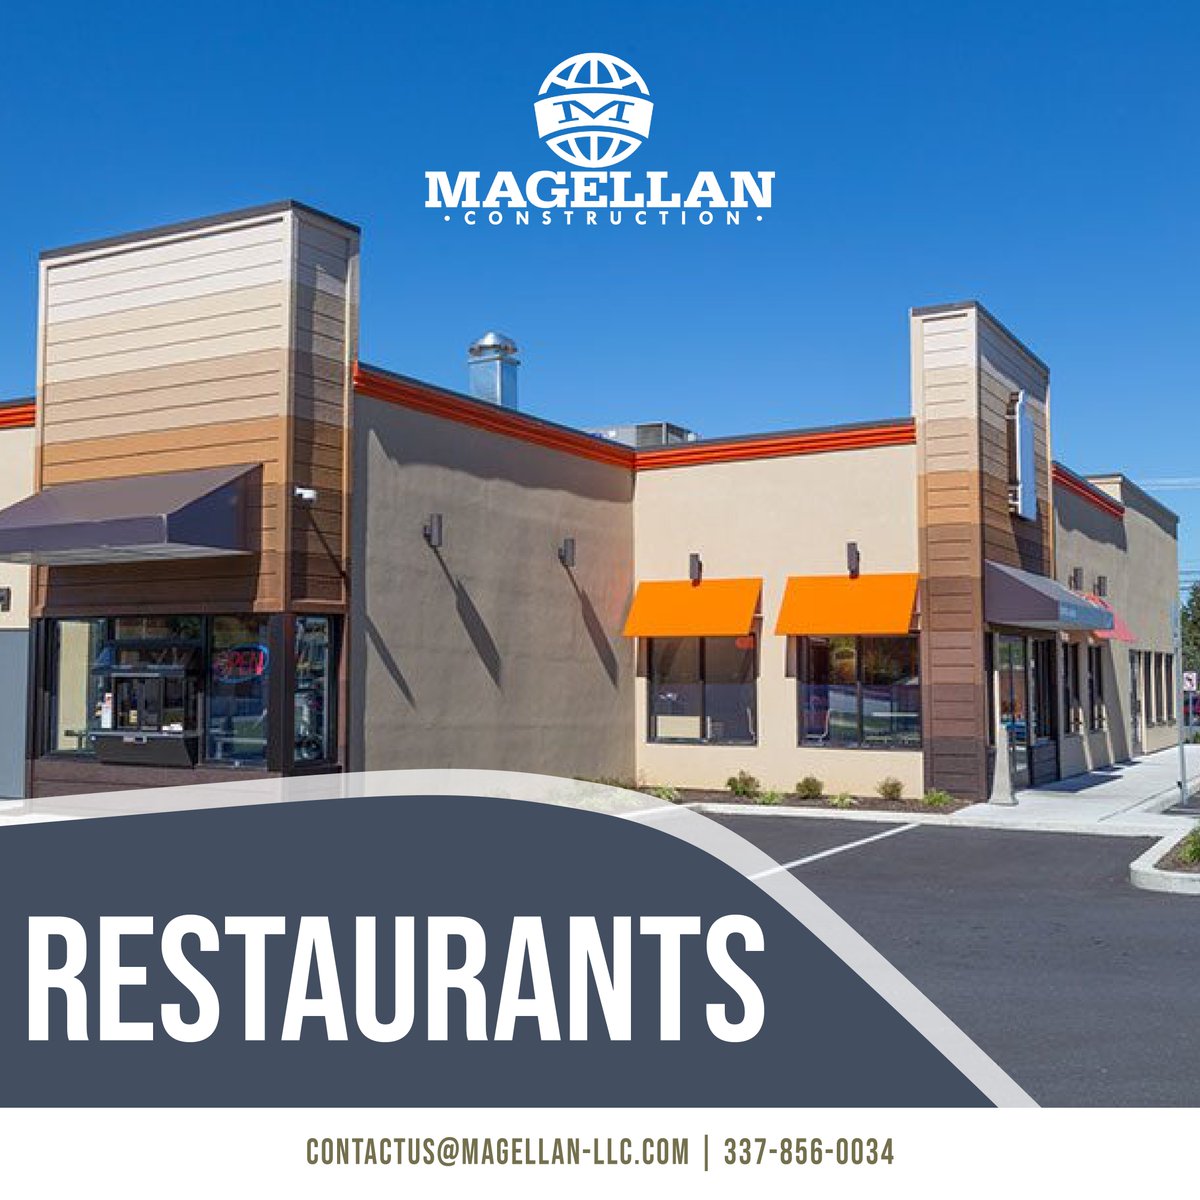 Do you need help with your next Restaurant Project? We are here for it!
Contact us today to see what we can do for you!

📱(337) 856-0034
📨contactus@magellan-llc.com
🌐bit.ly/3V73fIG  

#CommercialConstruction #Construction #RestaurantConstruction #WeGetItDone #Mage ...